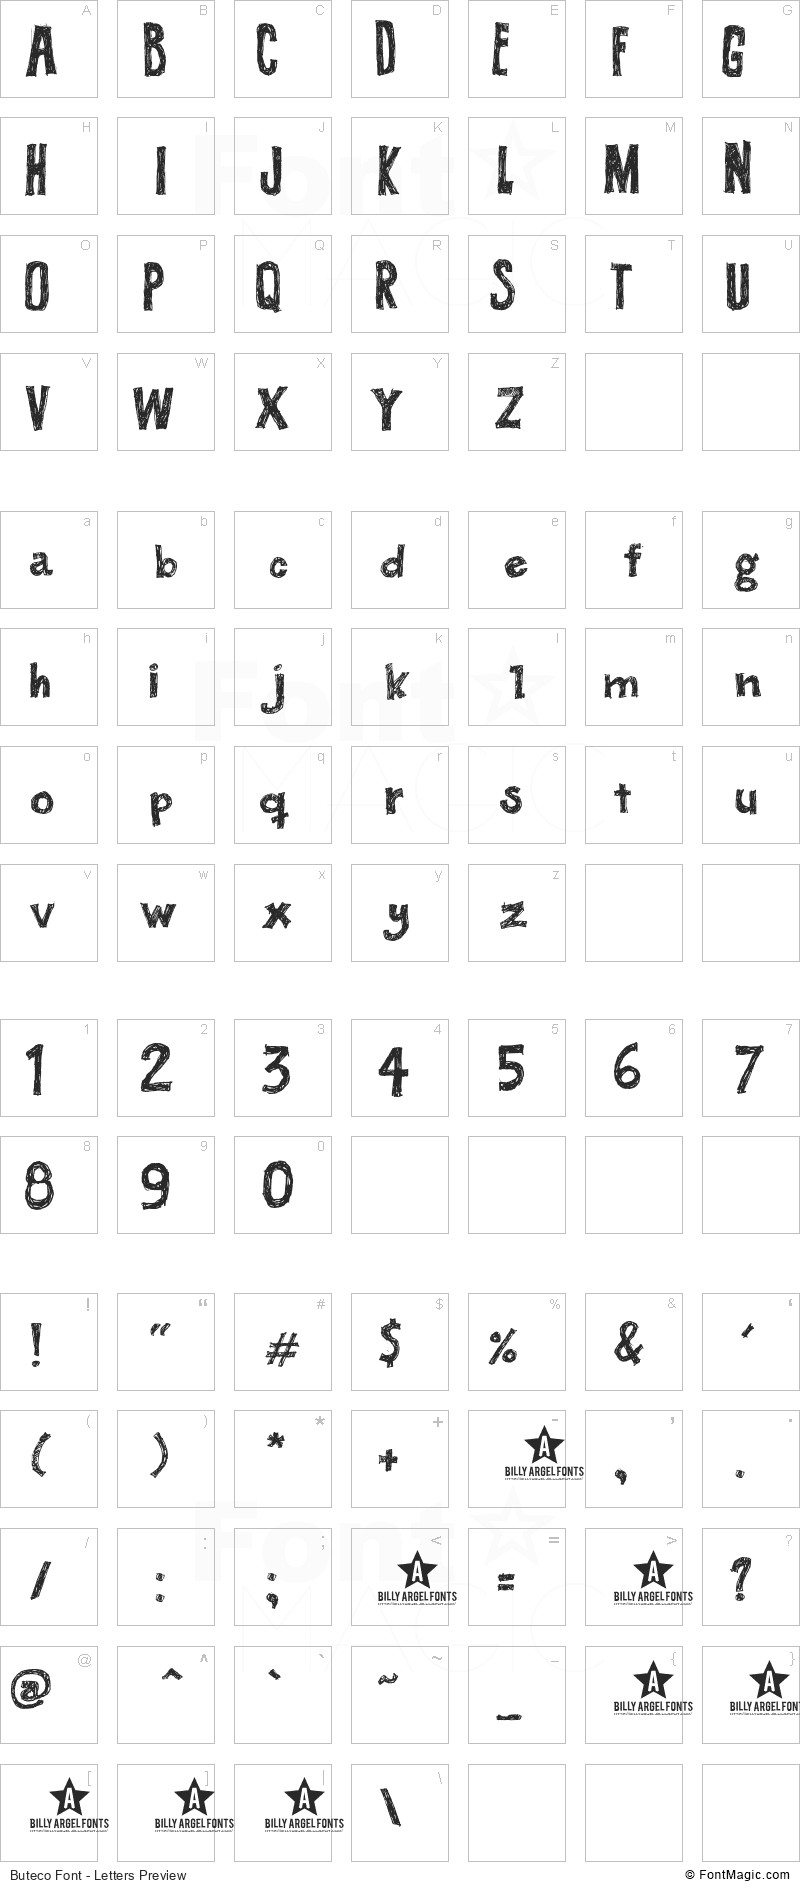 Buteco Font - All Latters Preview Chart